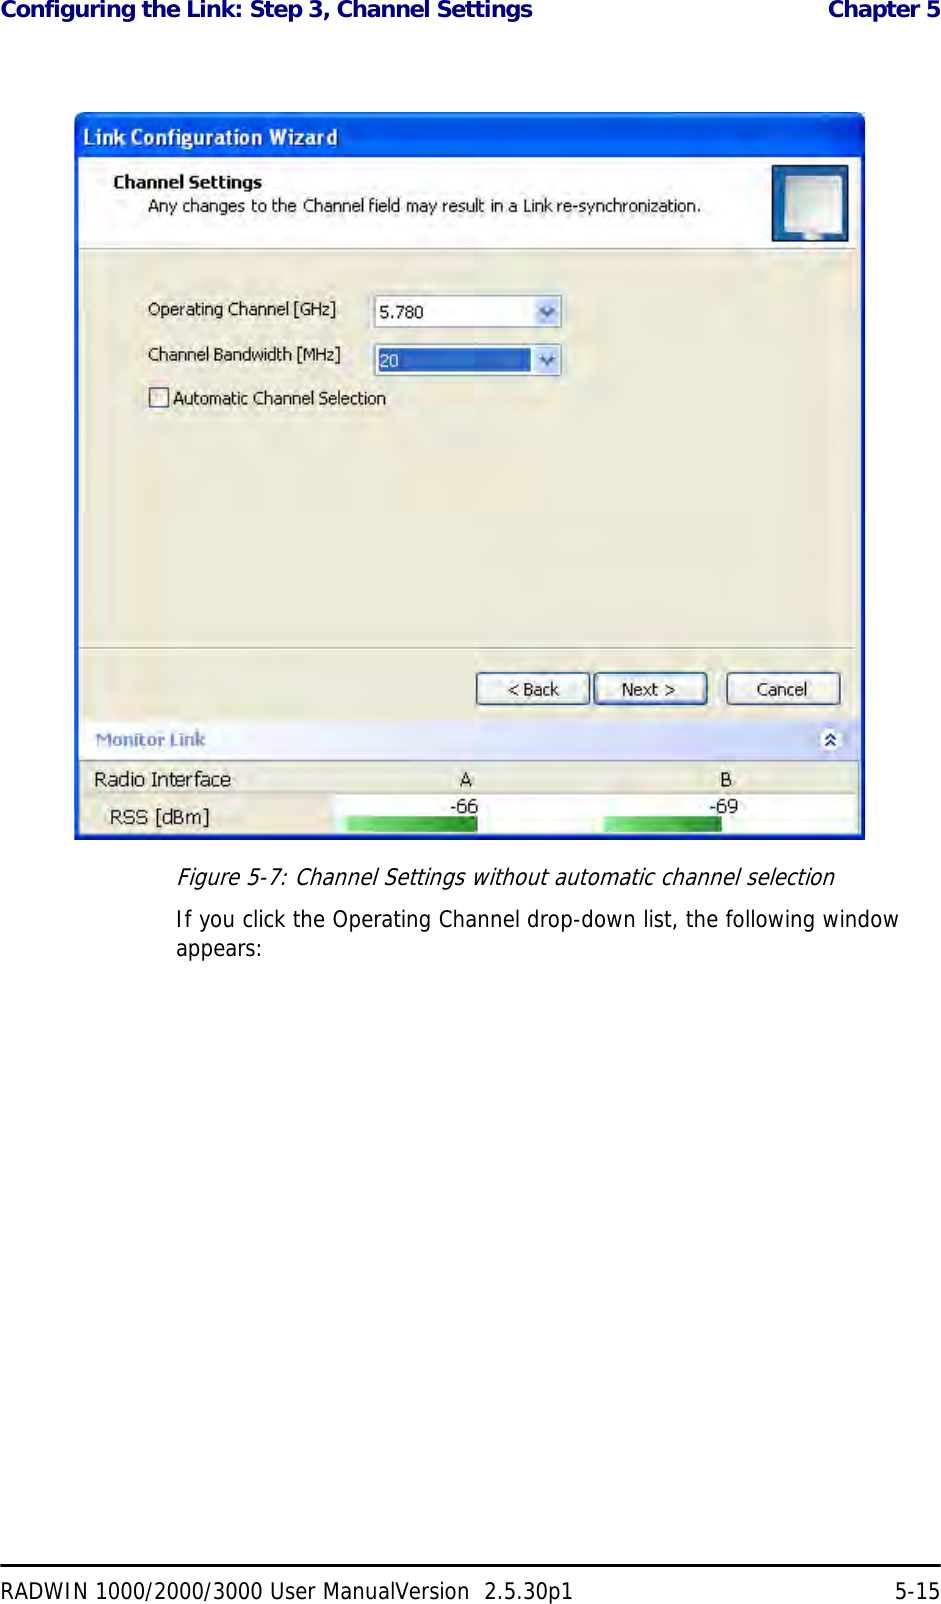 Configuring the Link: Step 3, Channel Settings  Chapter 5RADWIN 1000/2000/3000 User ManualVersion  2.5.30p1 5-15Figure 5-7: Channel Settings without automatic channel selectionIf you click the Operating Channel drop-down list, the following window appears: